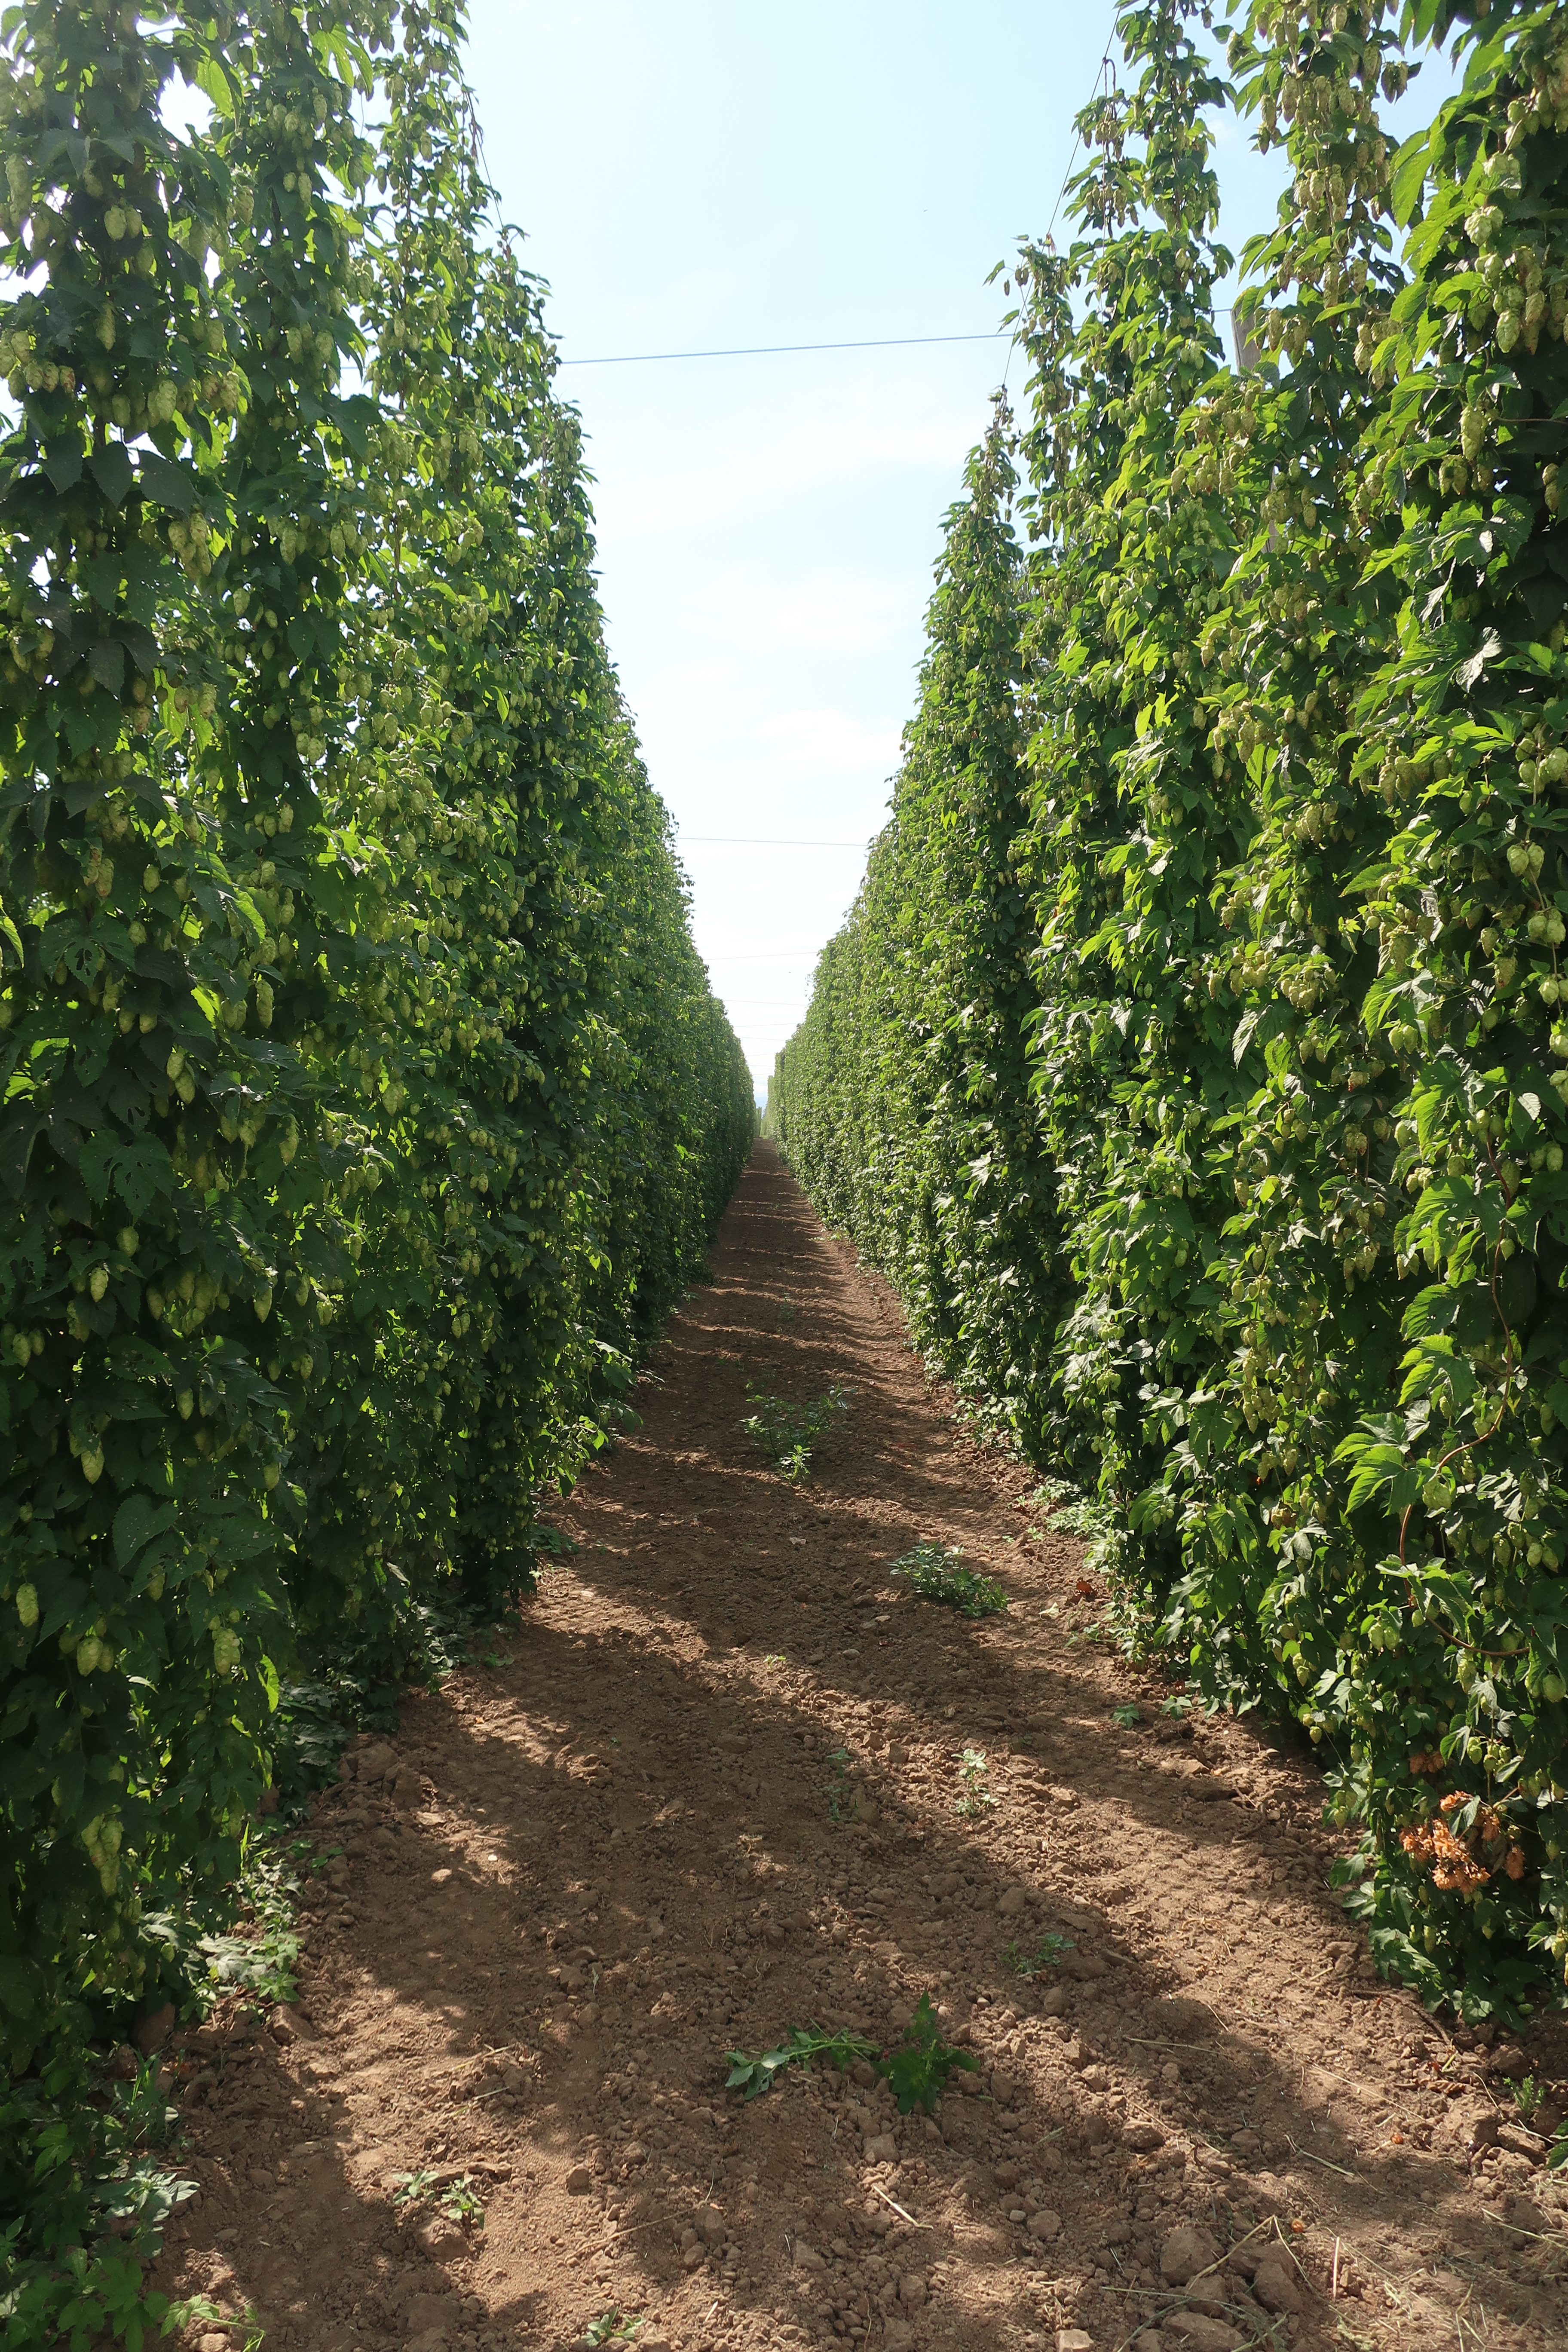 Hop fields in Independence, Oregon at Coleman Agriculture.